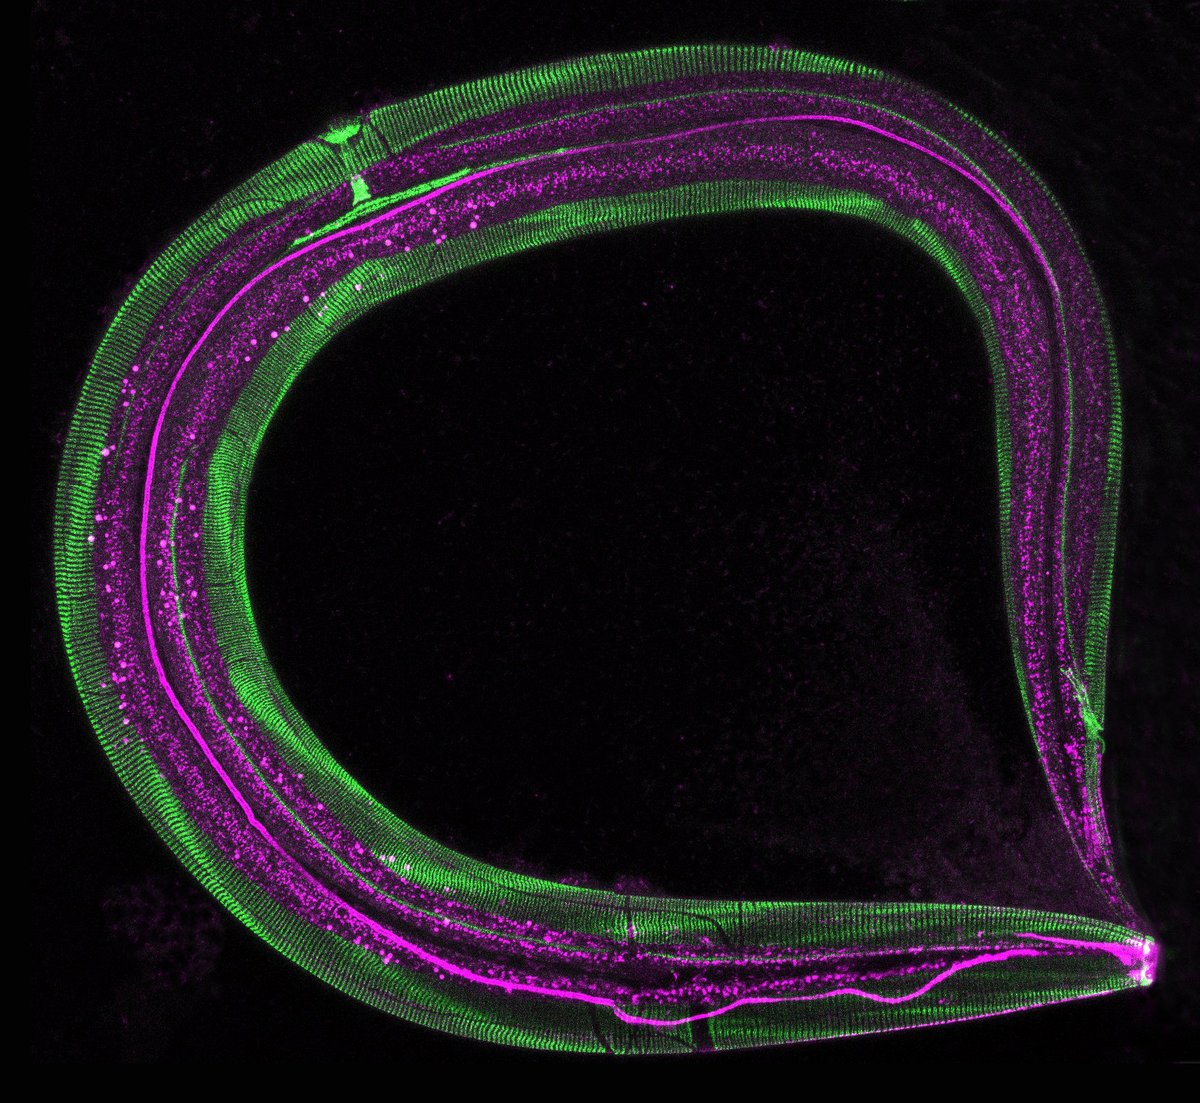 We have an open postdoc position at the @CIML_Immunology @centuri_ls in Marseille, to work on damage sensing through mechano-transduction in the epidermis in #C_elegans, with @FM4B_Lab. Please contact me pujol@ciml.univ-mrs.fr